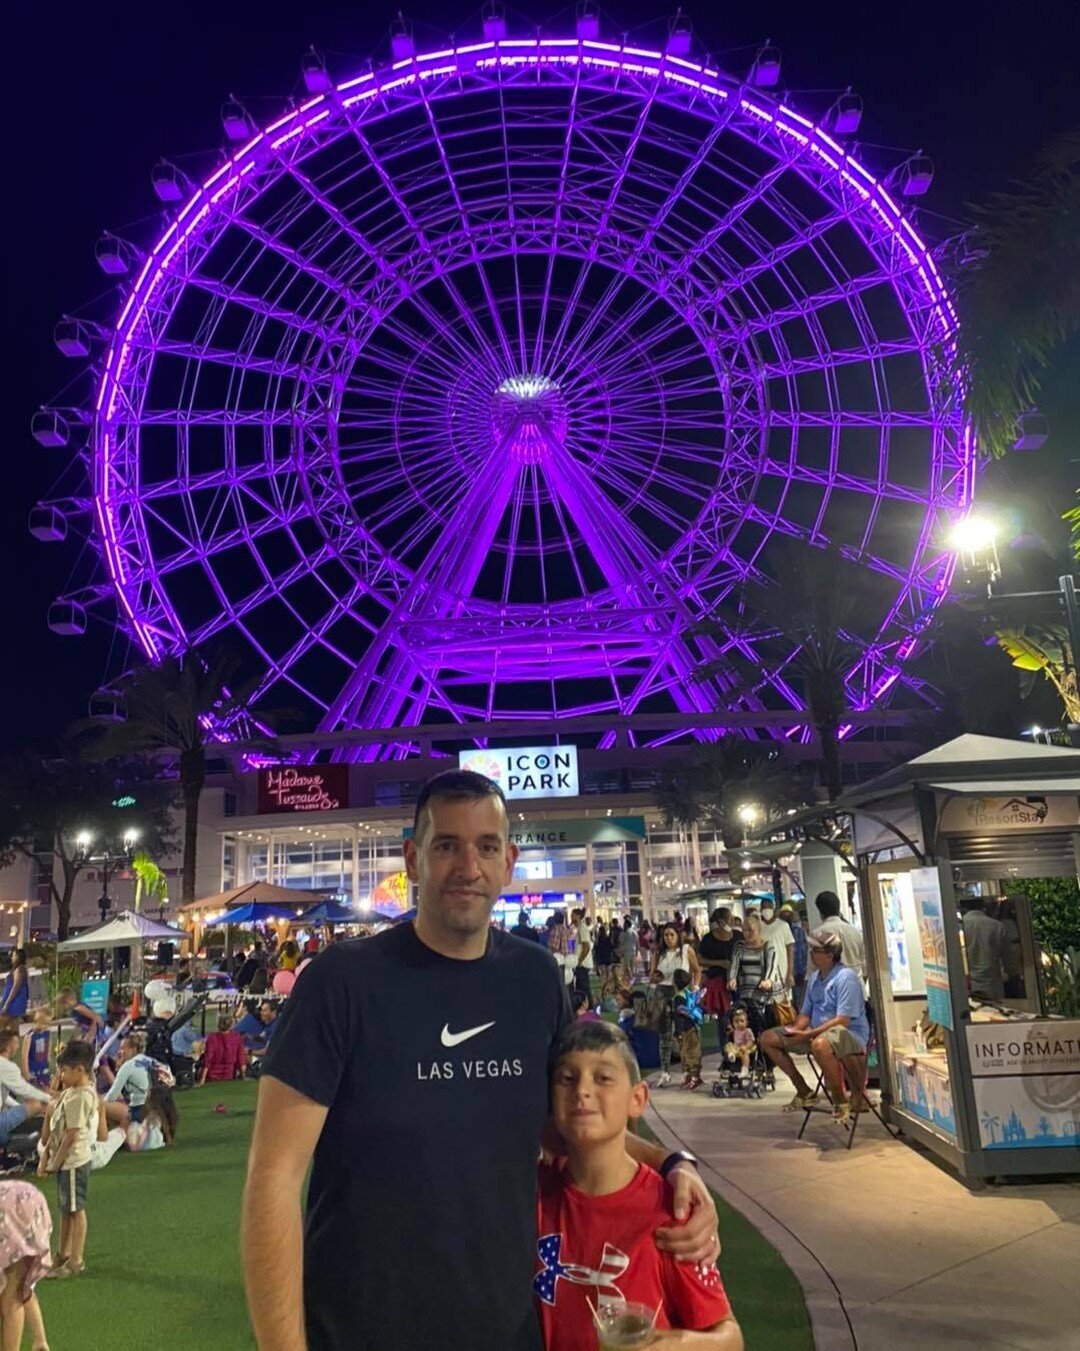 Hanging out at Icon Park in Orlando tonight. How high do you think The Wheel is? 

#savetwdw #disneyworld #iconpark